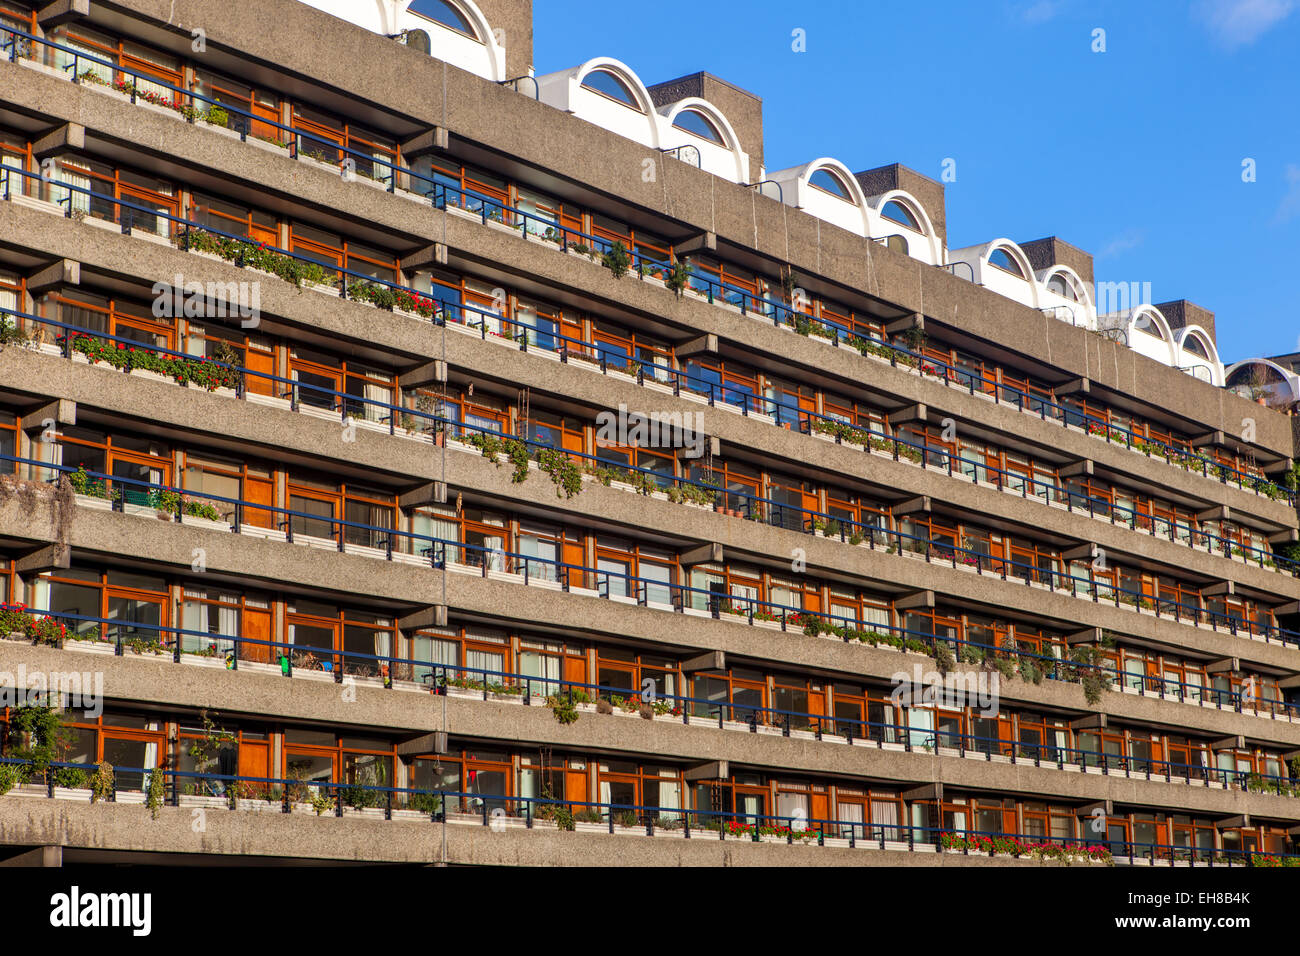 Barbican Apartments, modernist architecture and high rise residential living in London, England, United Kingdom, Europe Stock Photo